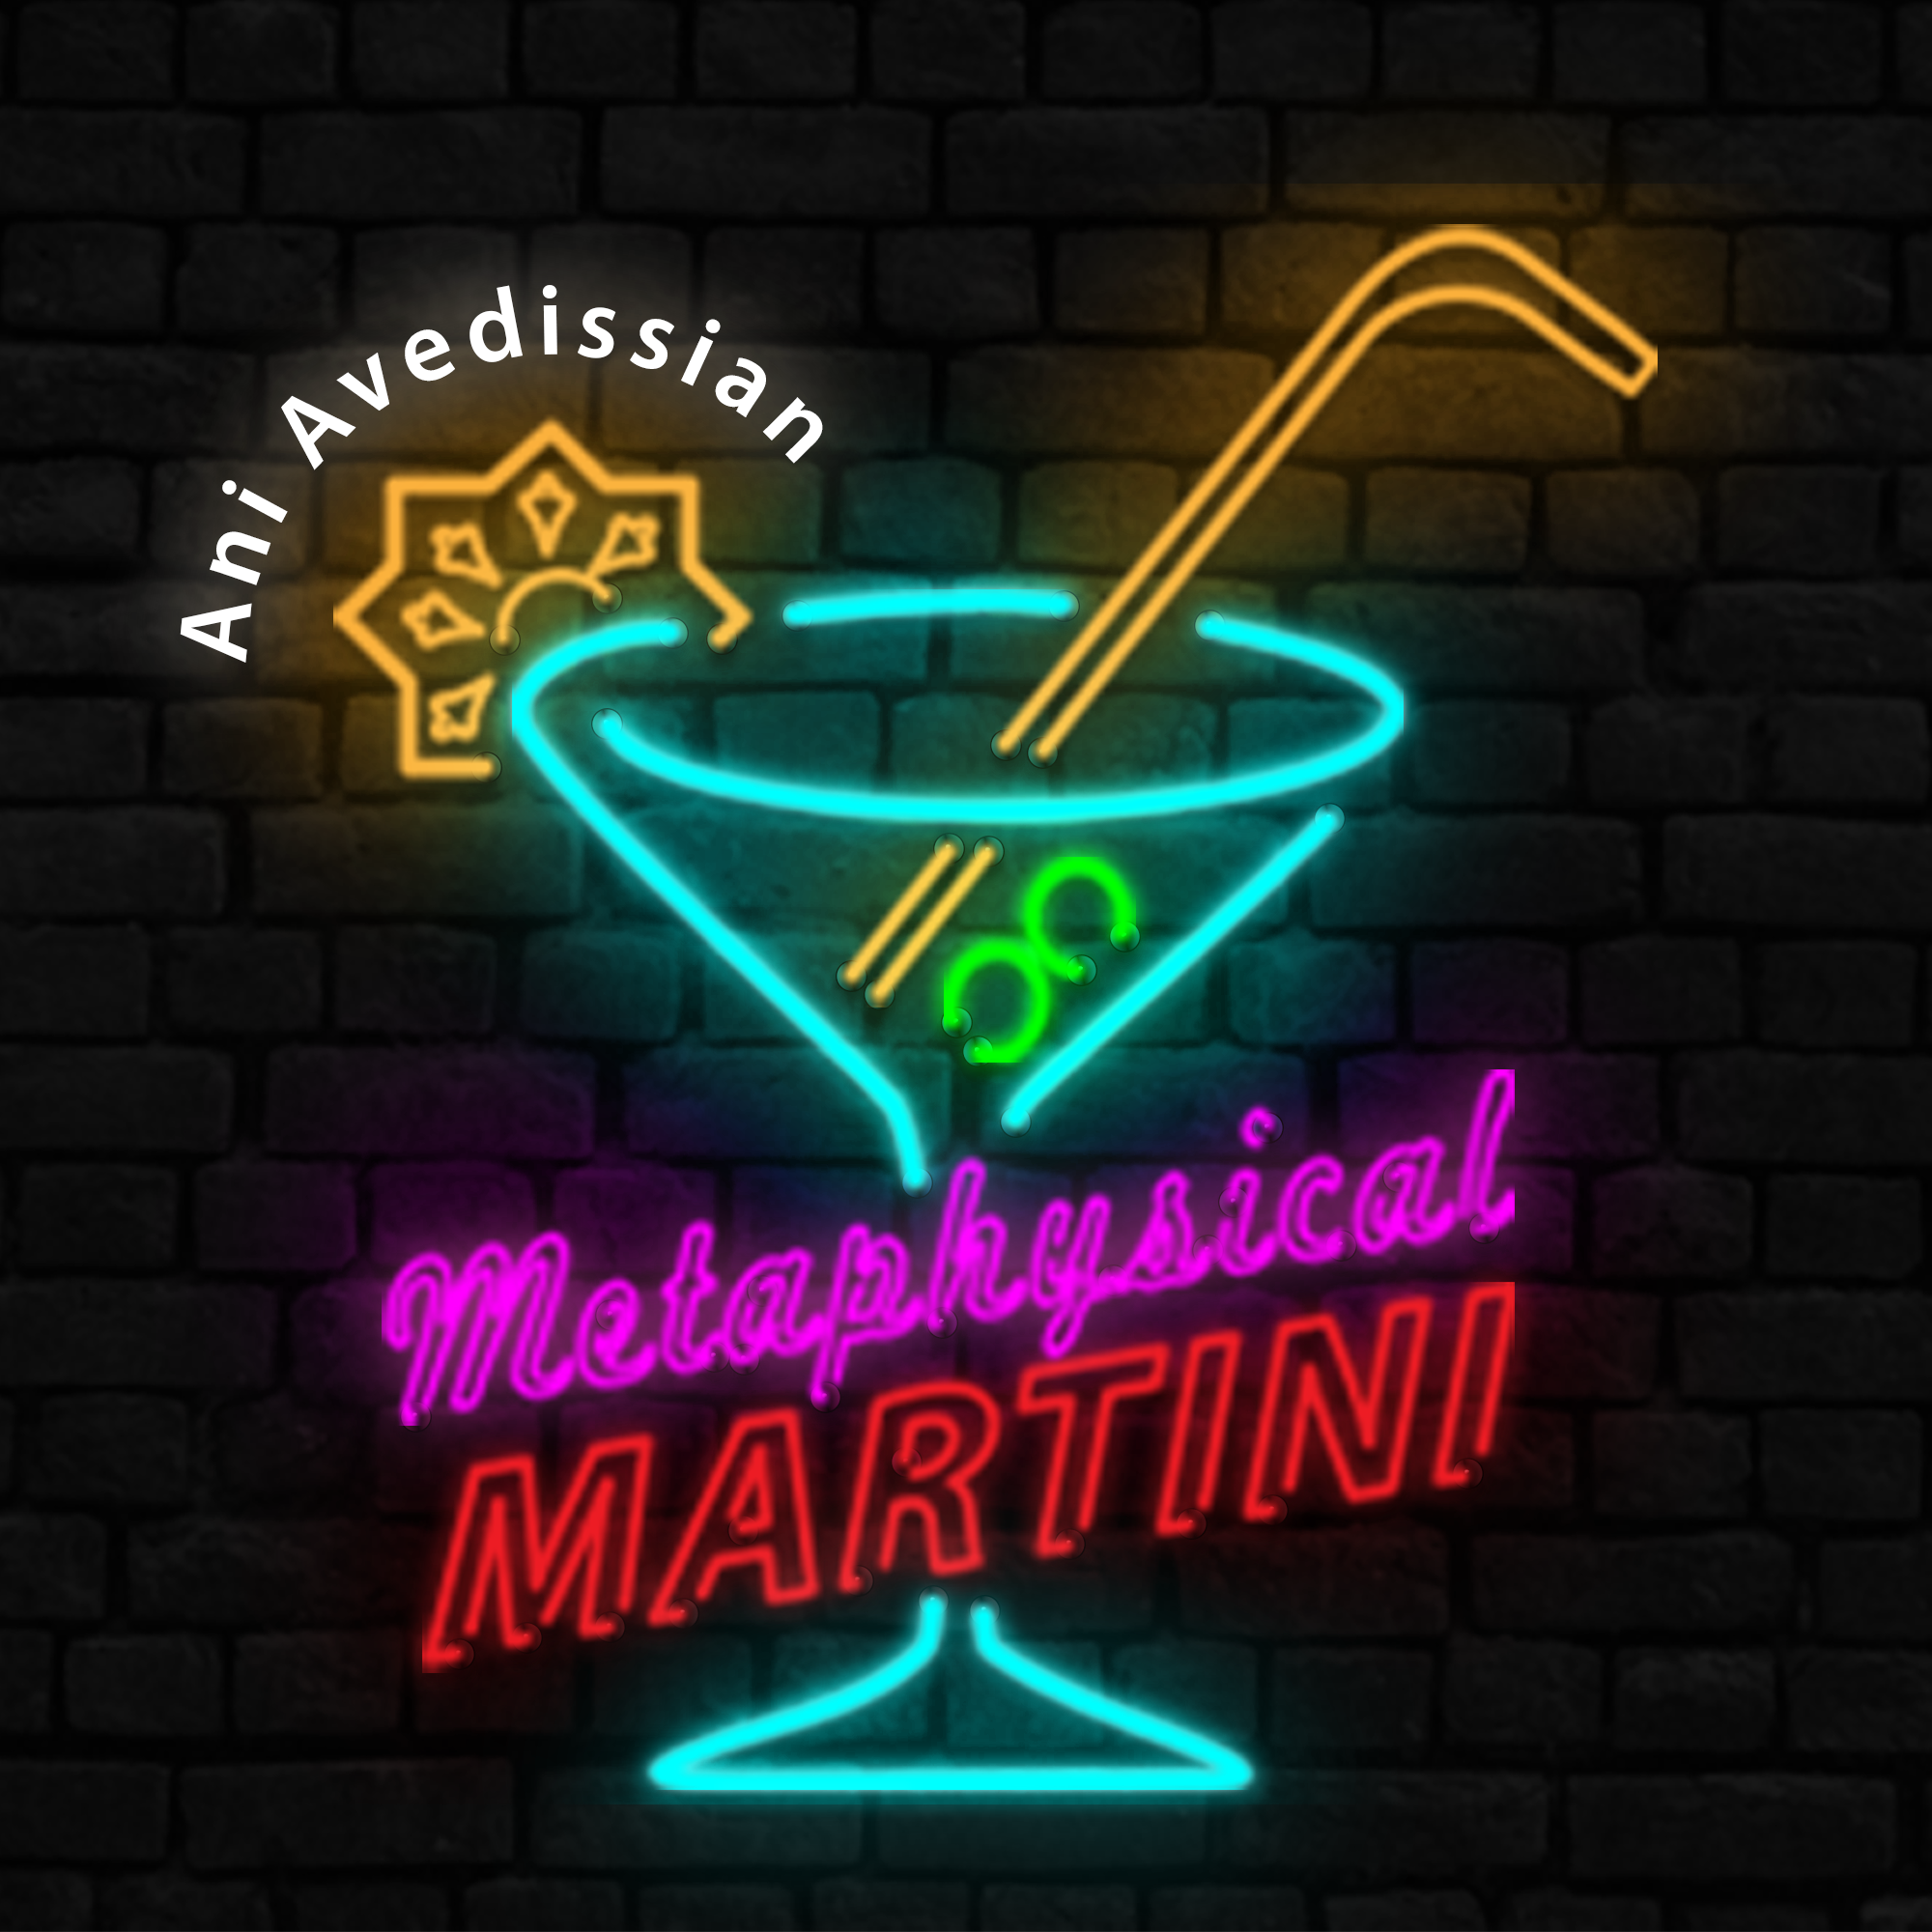 "Metaphysical Martini" 04/26/2023 - If the goal is to be happy, why do we feel so crappy?